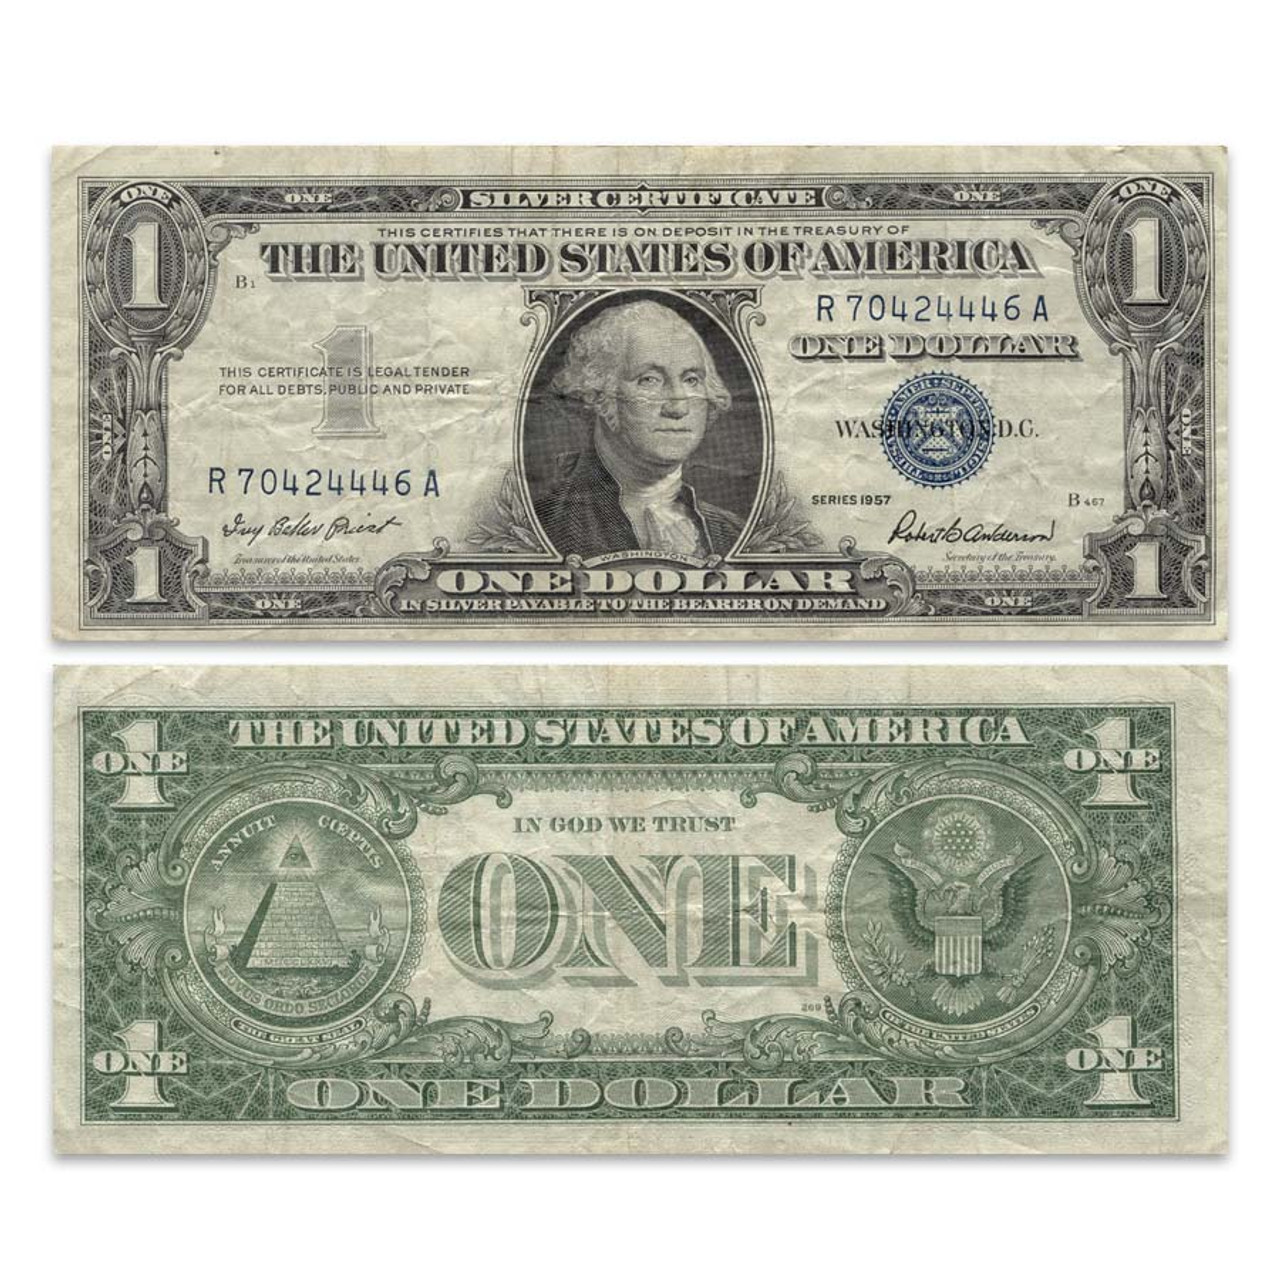 Classic Paper Money at a Great Price!